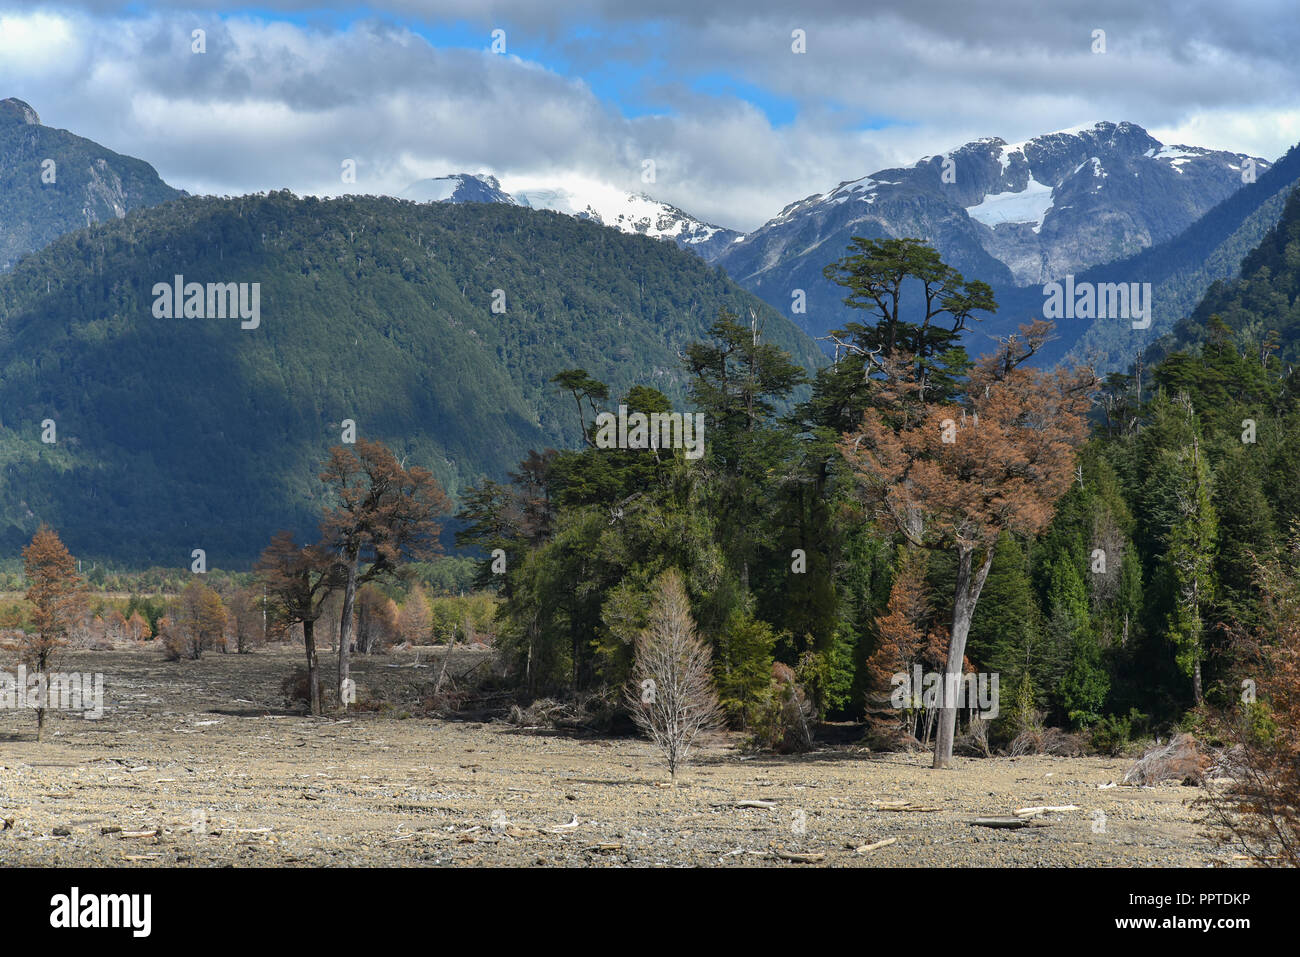 Destroyed forest by a landslide in Villa Santa Lucía, at Chaiten, Rio Burritos, Carretera Austral, Patagonia, Chile Stock Photo